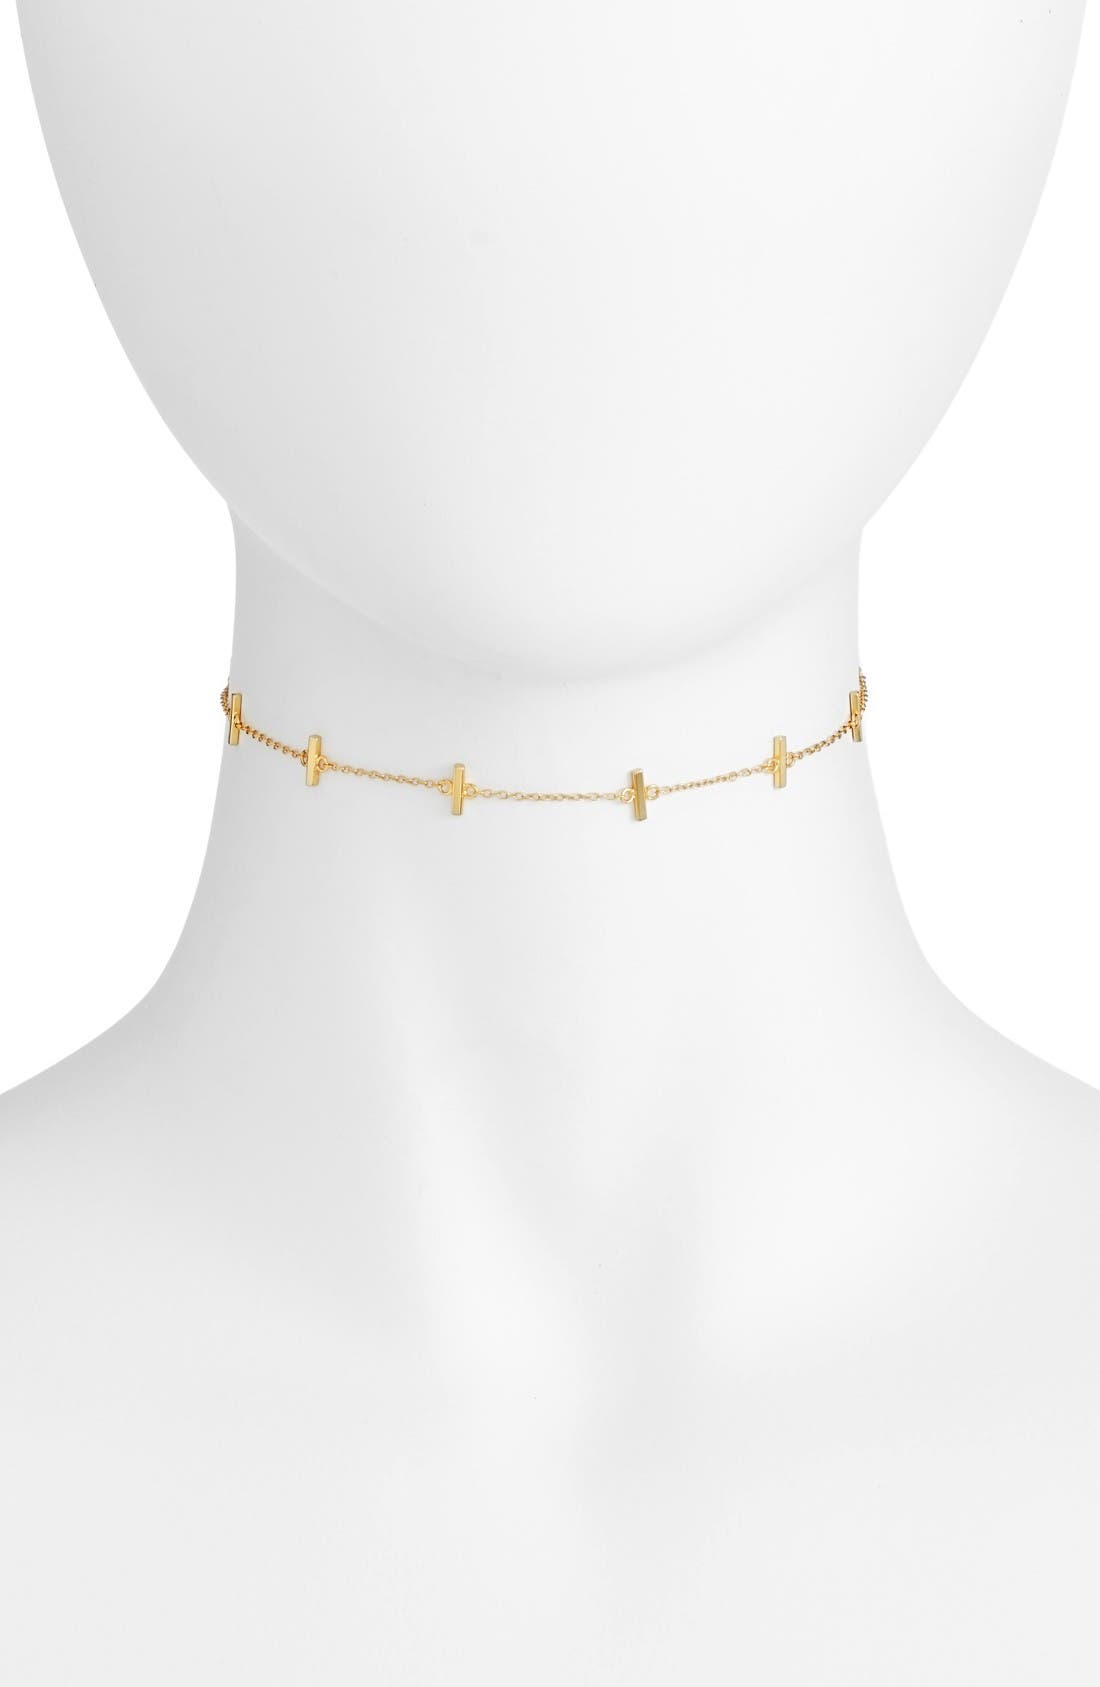 Super Cute Gold Choker With Black Crystal Accents